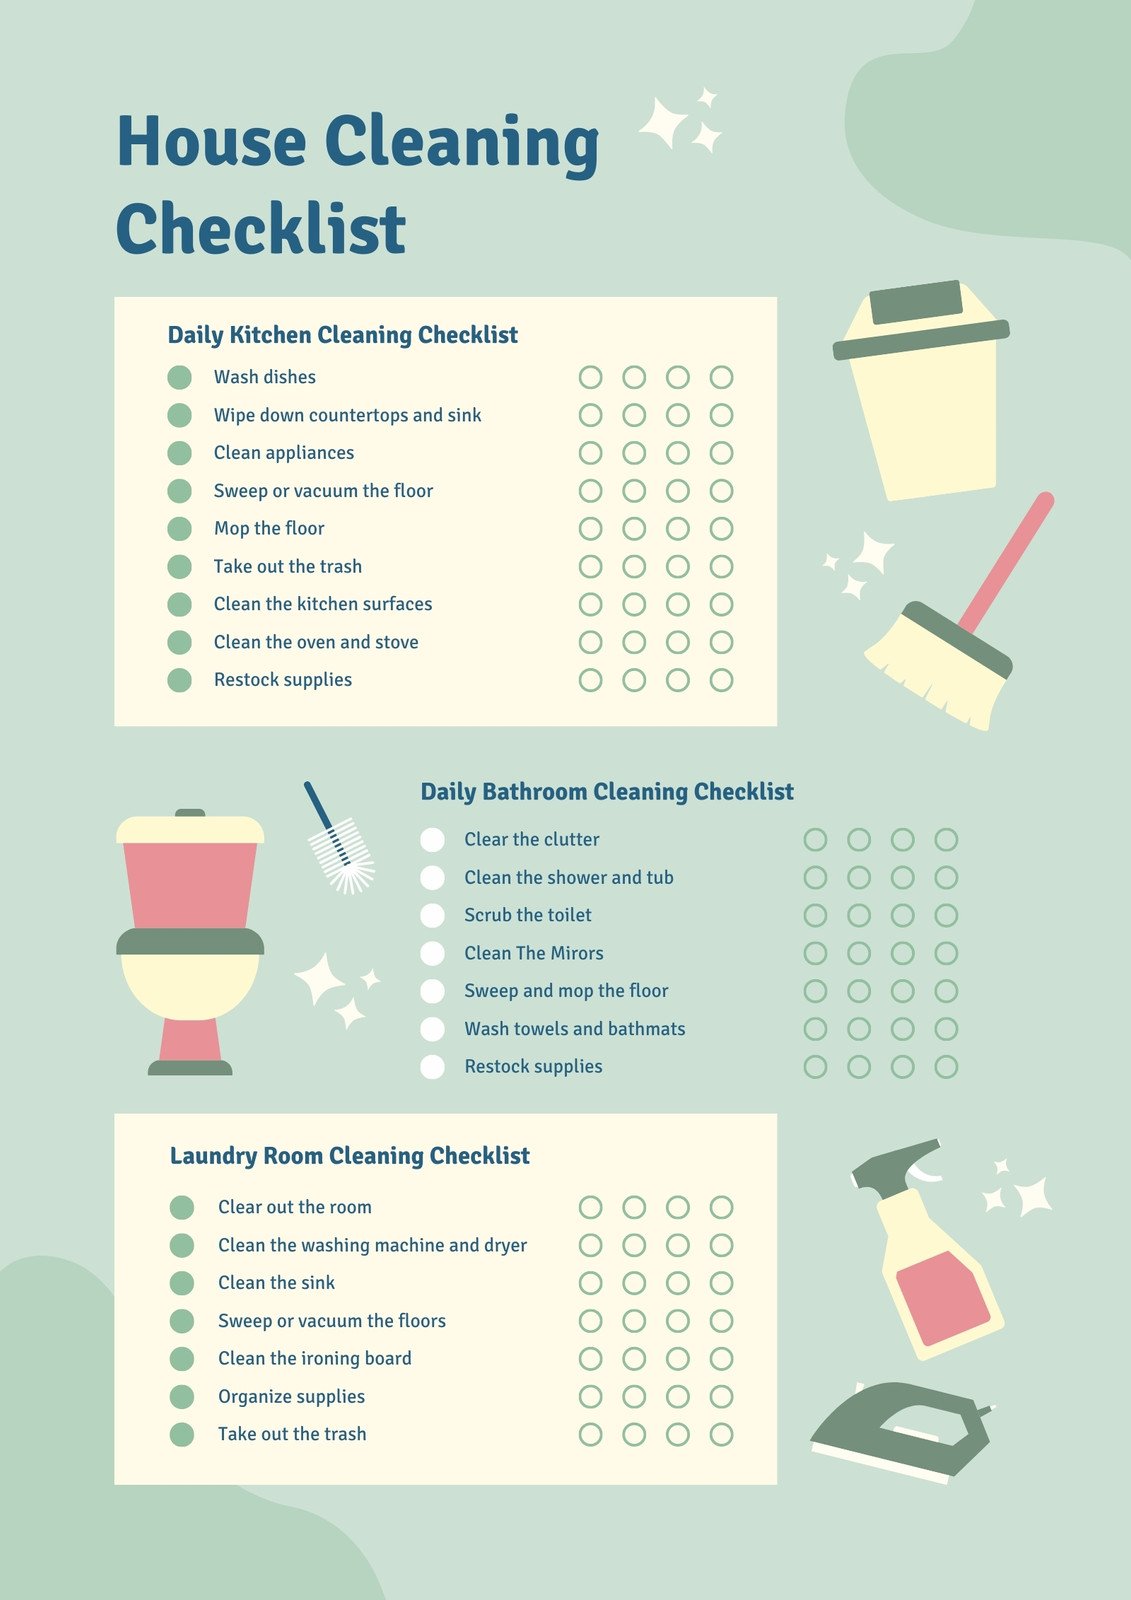 house cleaning supplies checklist